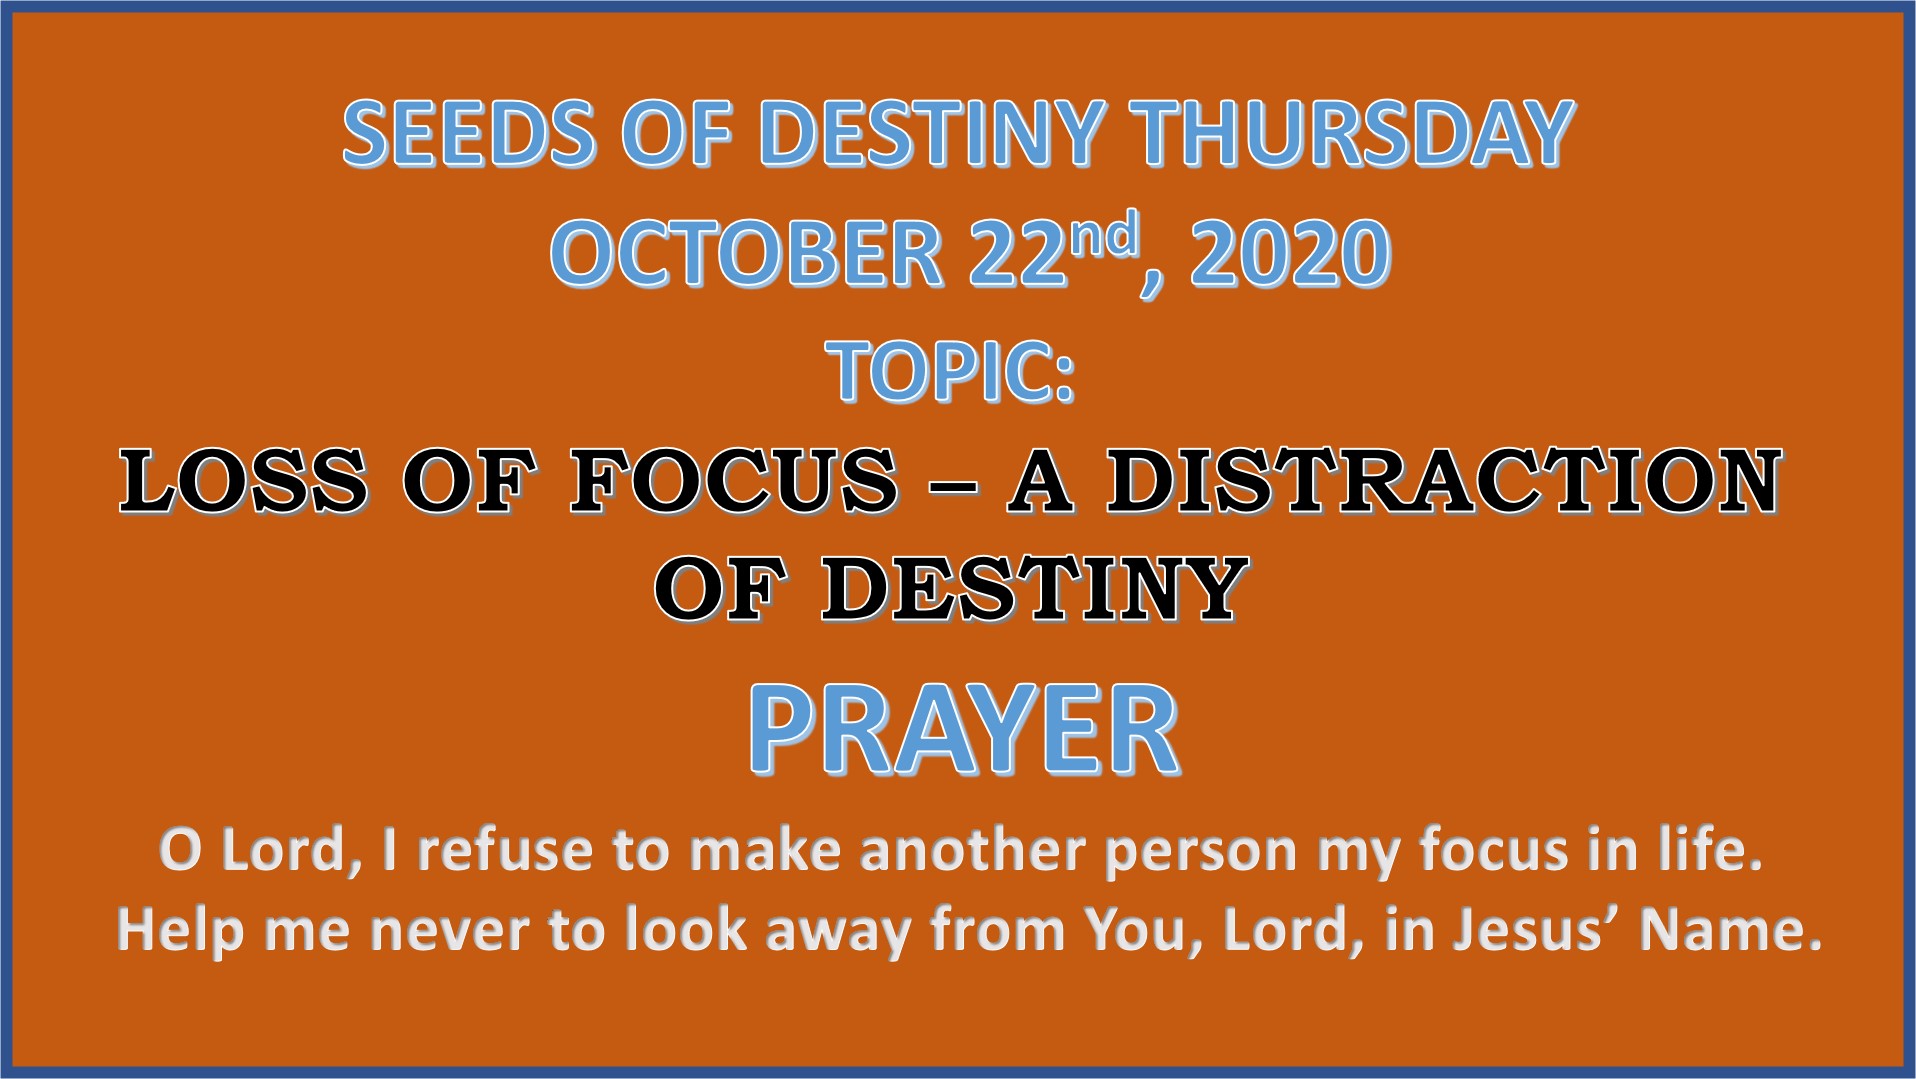 Seeds of Destiny Thursday 22nd October 2020 by Dr Paul Enenche